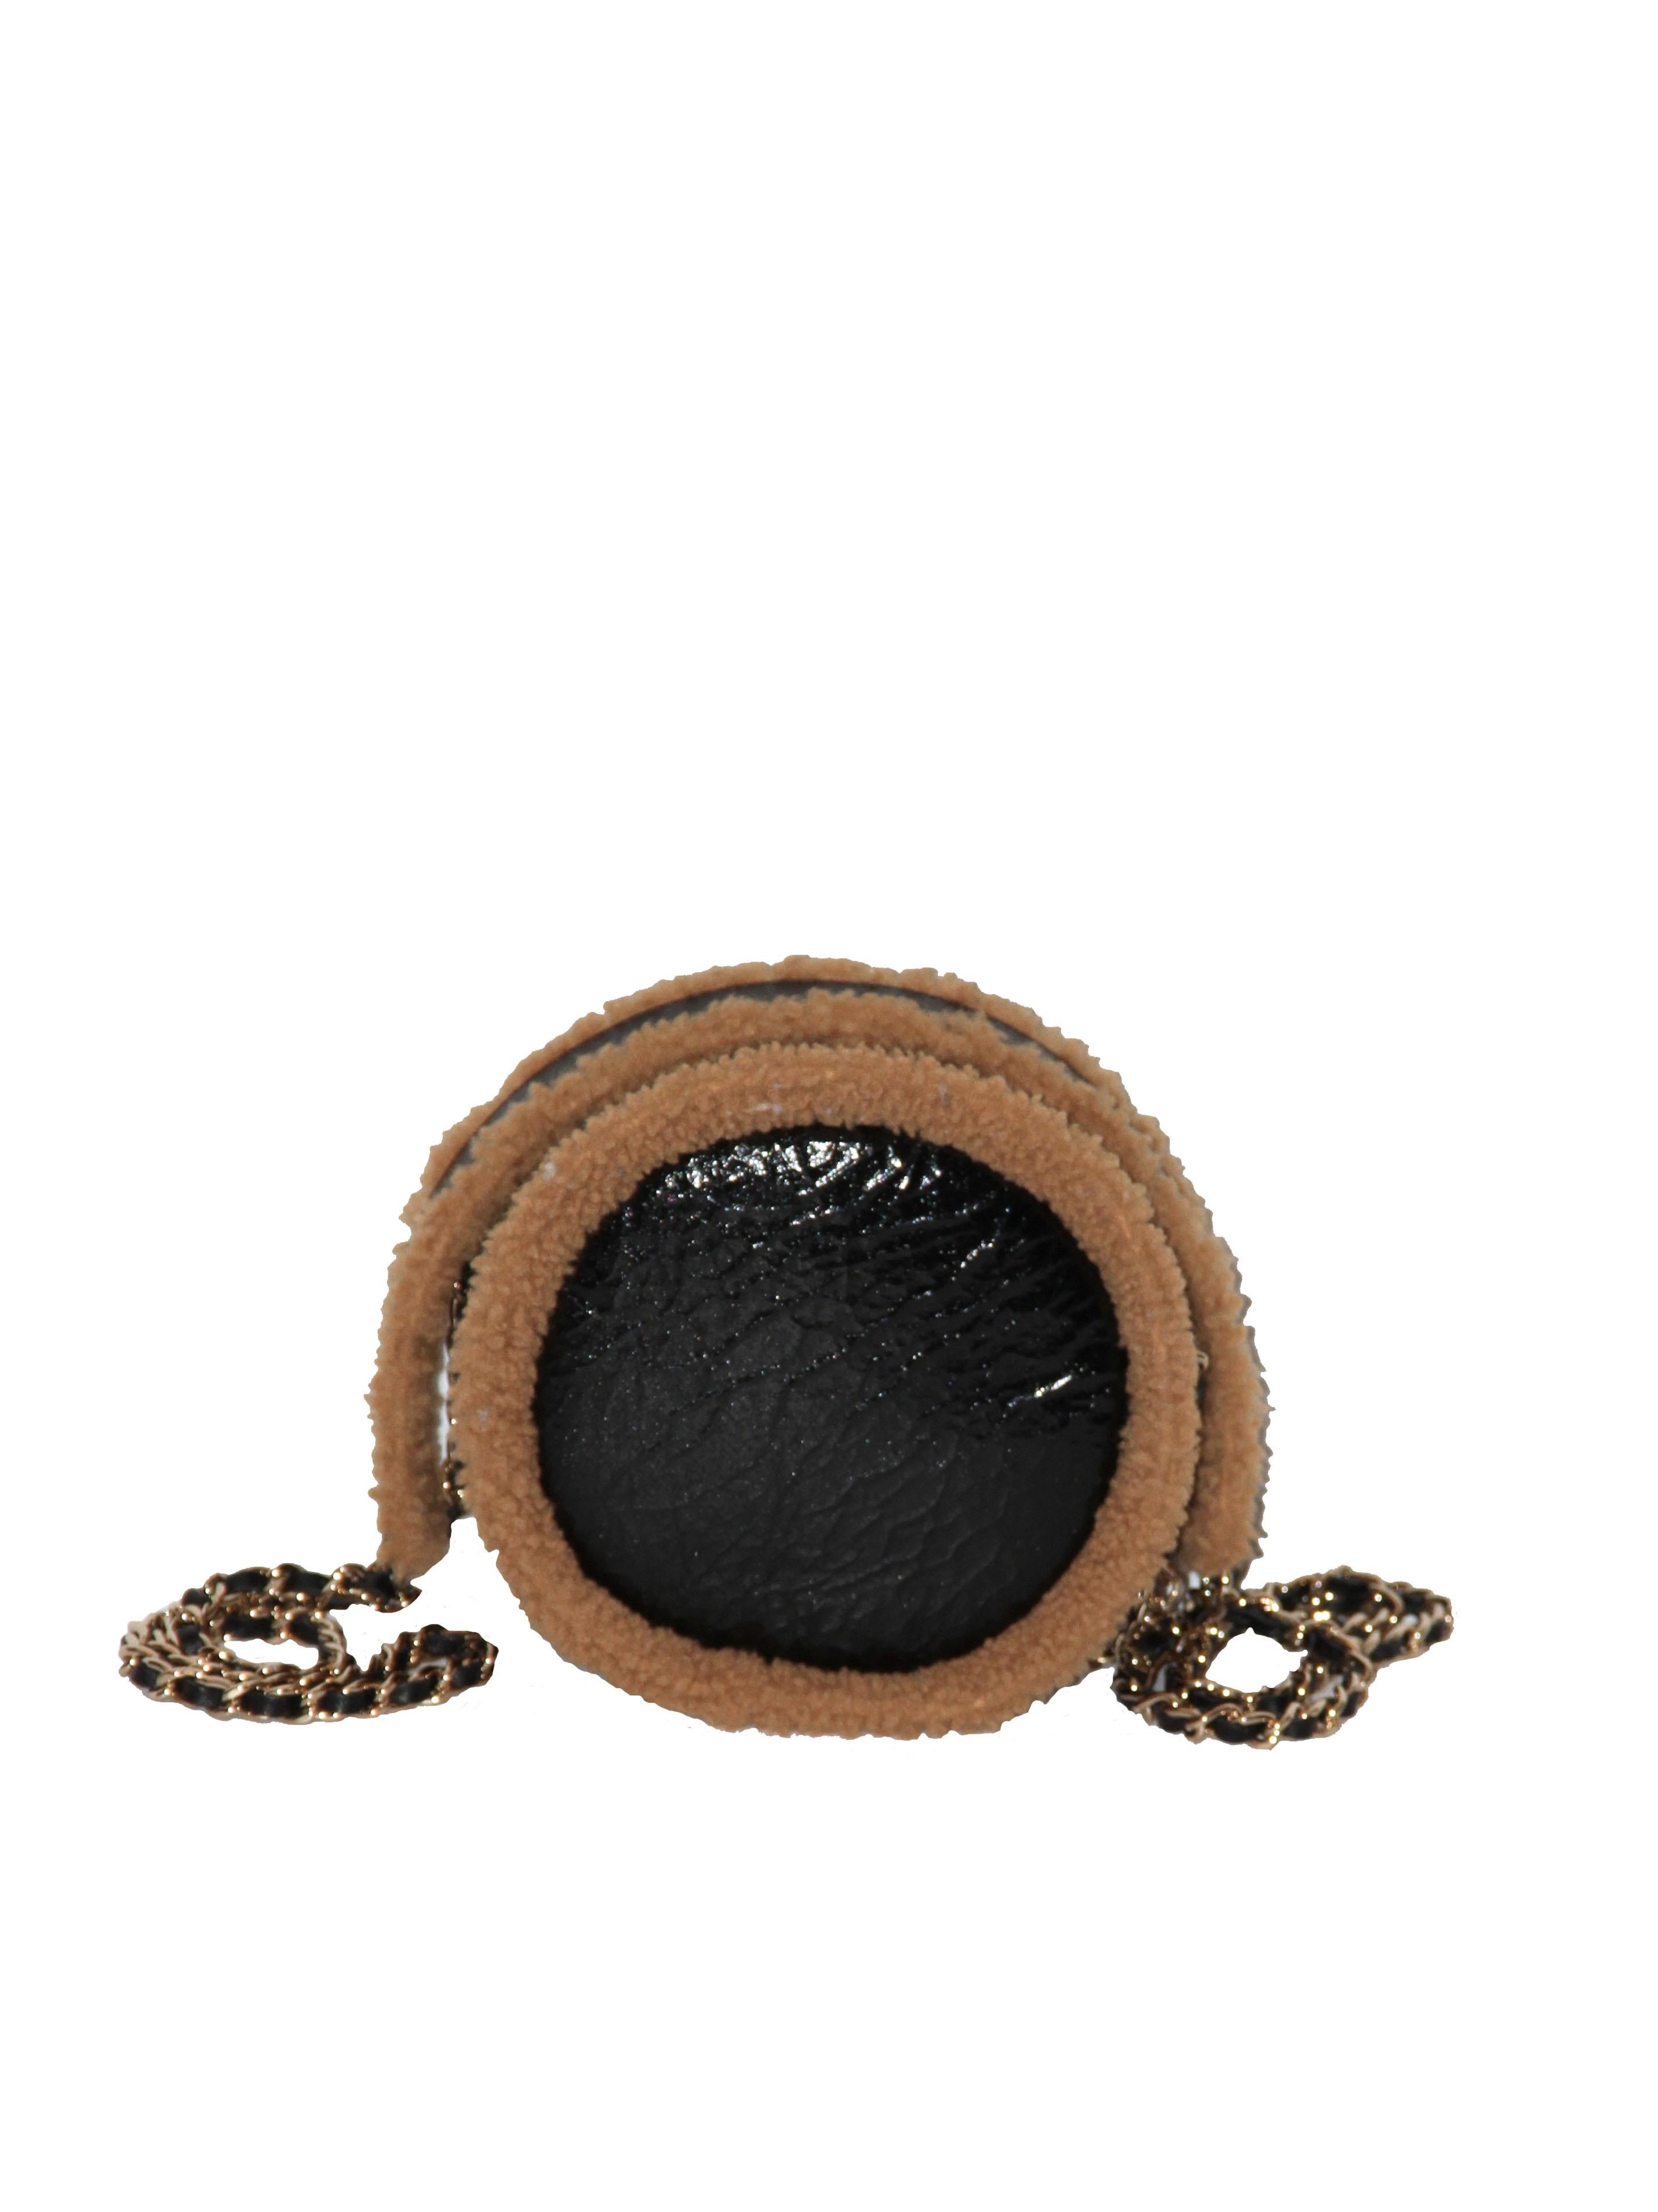 This pre-owned Chanel Crossbody mini round CC bag from the Fall-Winter 2019 collection is crafted with unique crumpled leather and shearling sheepskin.
It features a little CC charm that’s attached to the woven chain leather strap.

Year: Winter